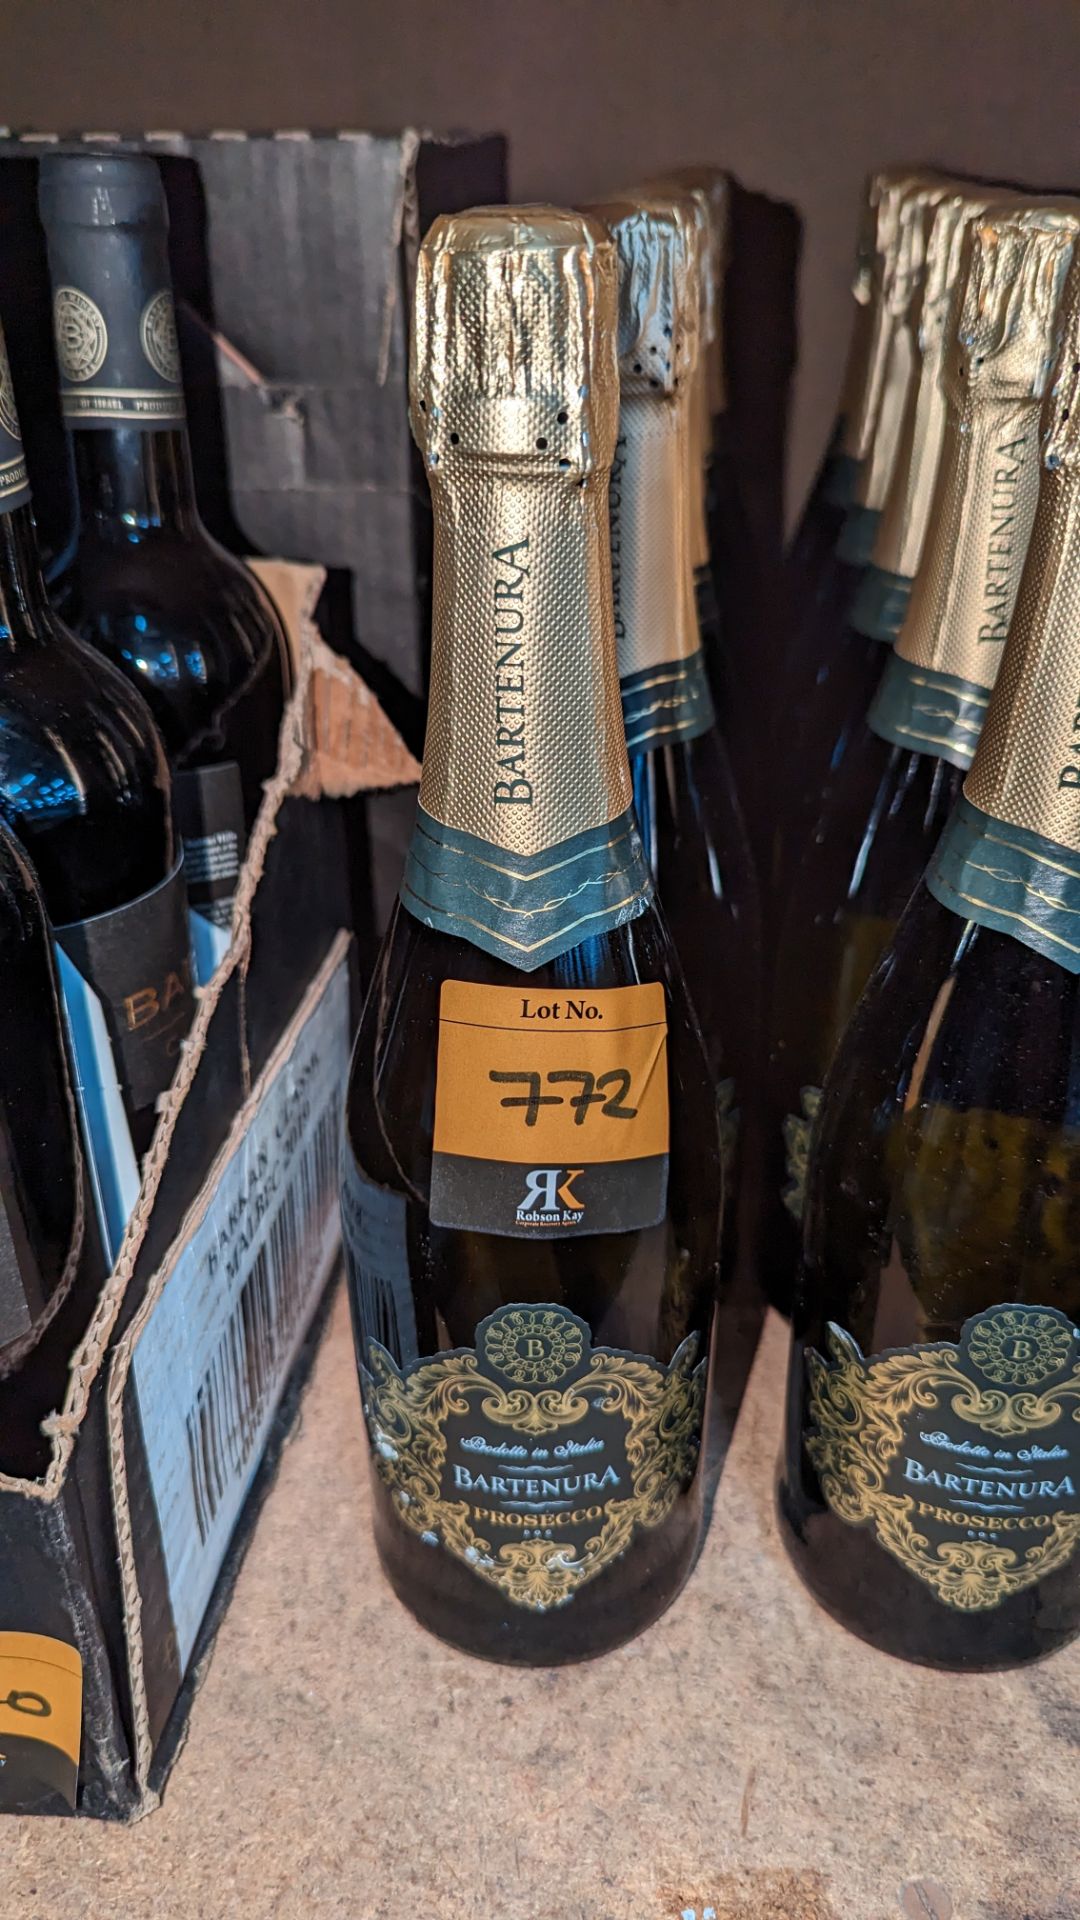 22 bottles of Bartenura Brut Prosecco Italian white sparkling wine sold under AWRS number XQAW000001 - Image 3 of 4